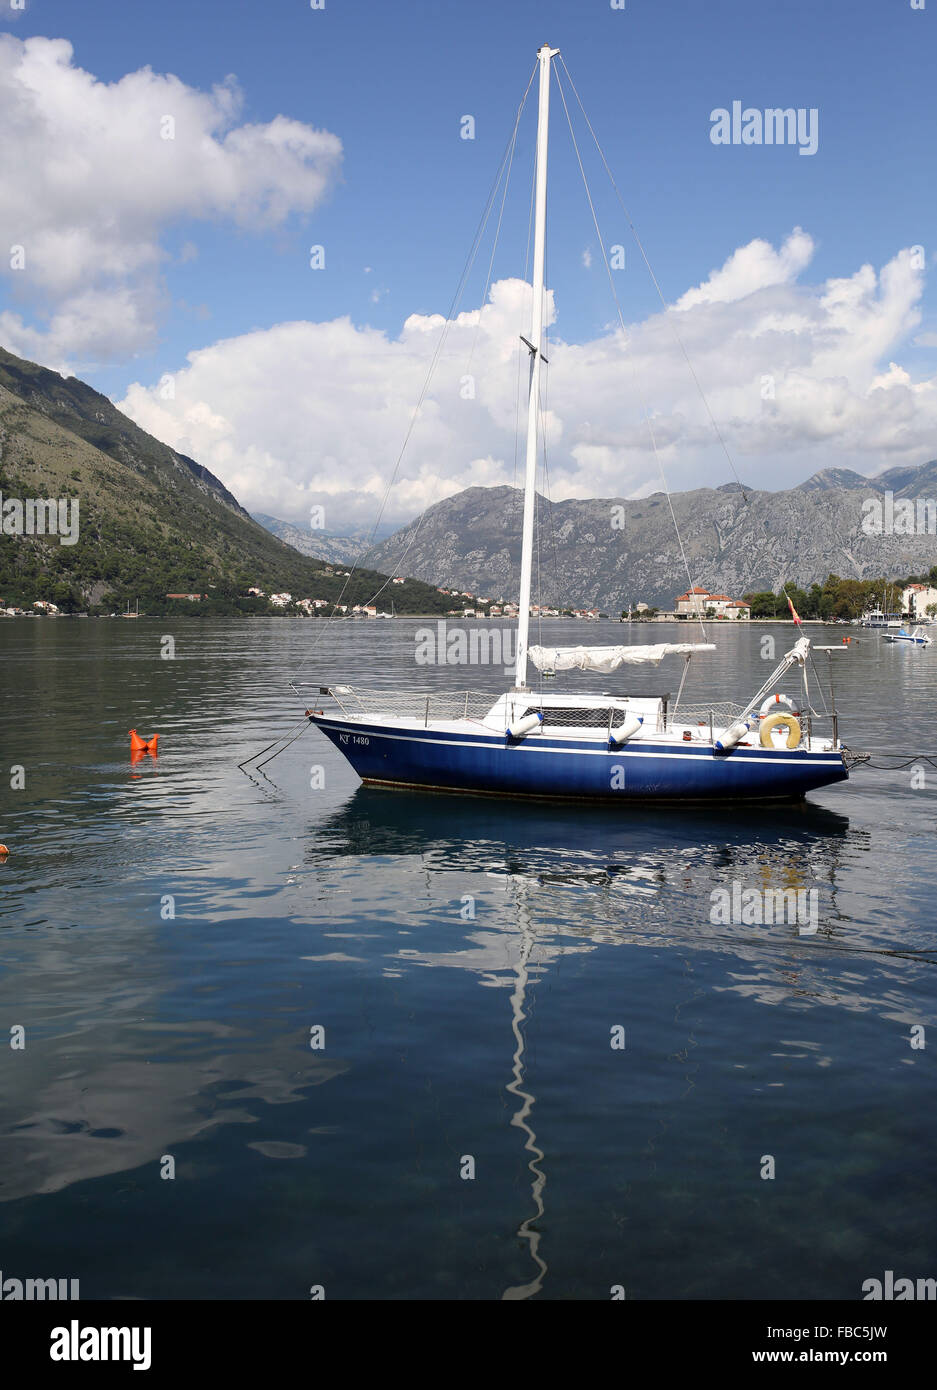 A yacht is pictured in the Bay of Kotor in Montenegró Stock Photo